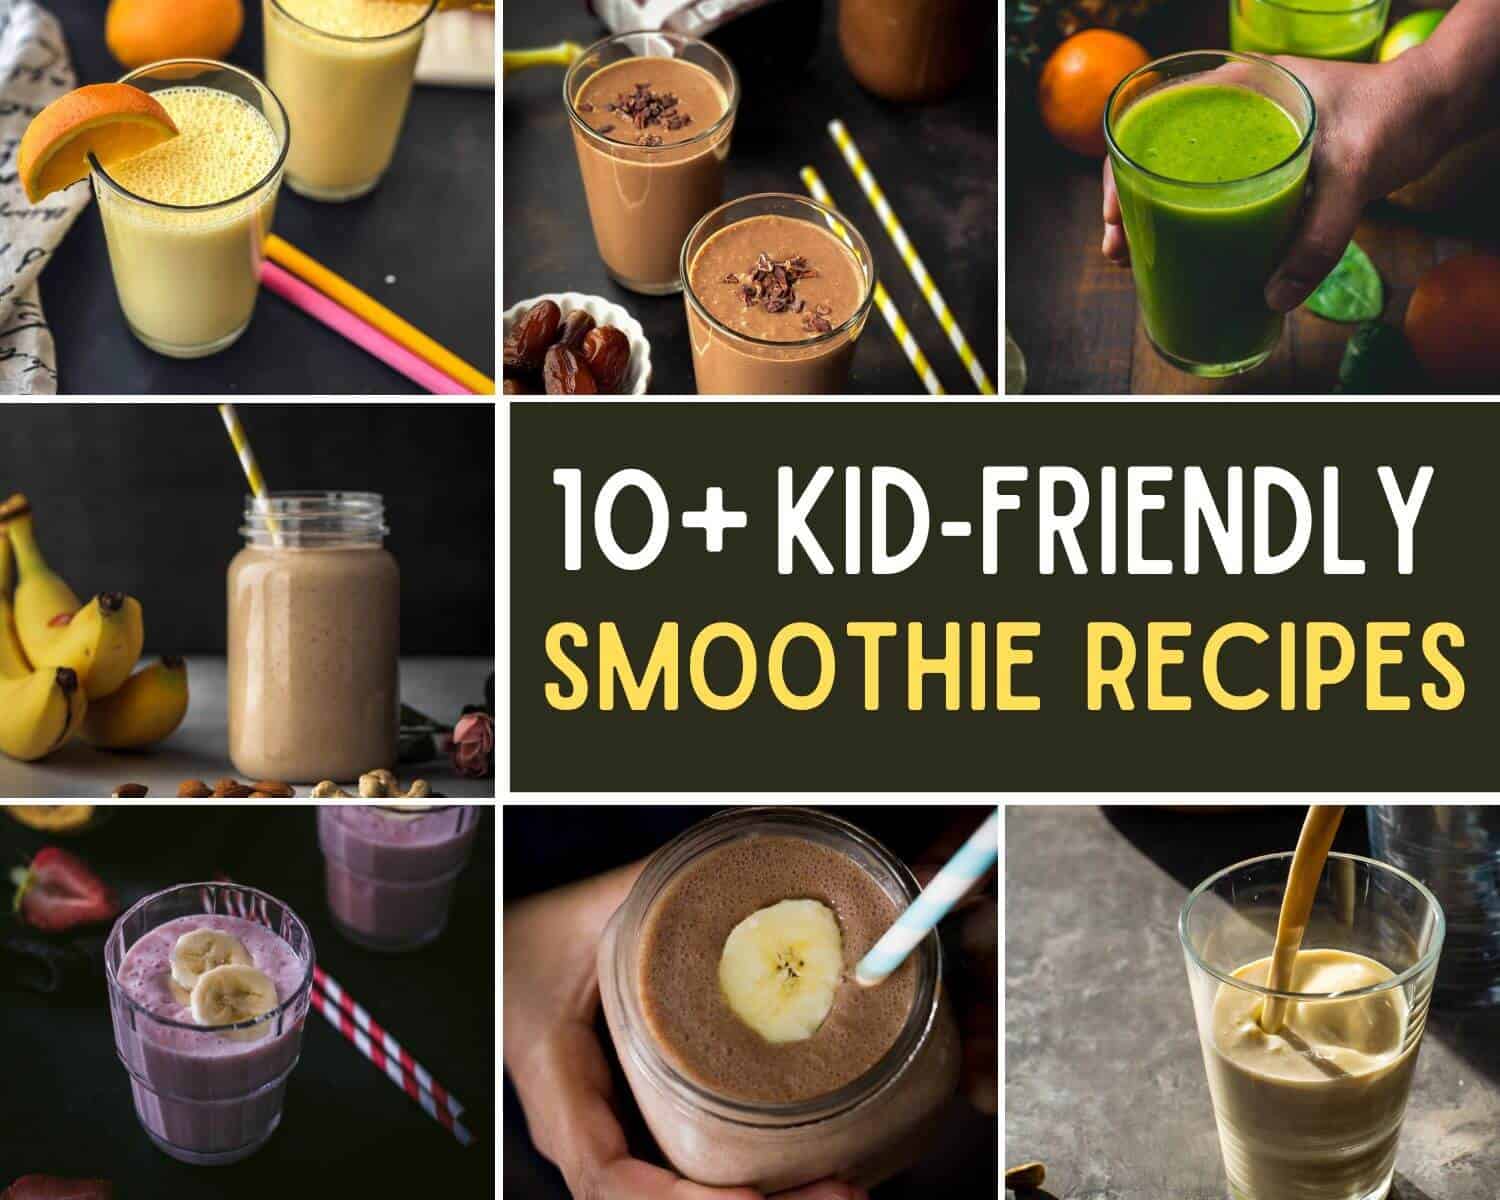 A collage of 7 images with caption 10+ kid-friendly smoothie recipes that are kid-friendly